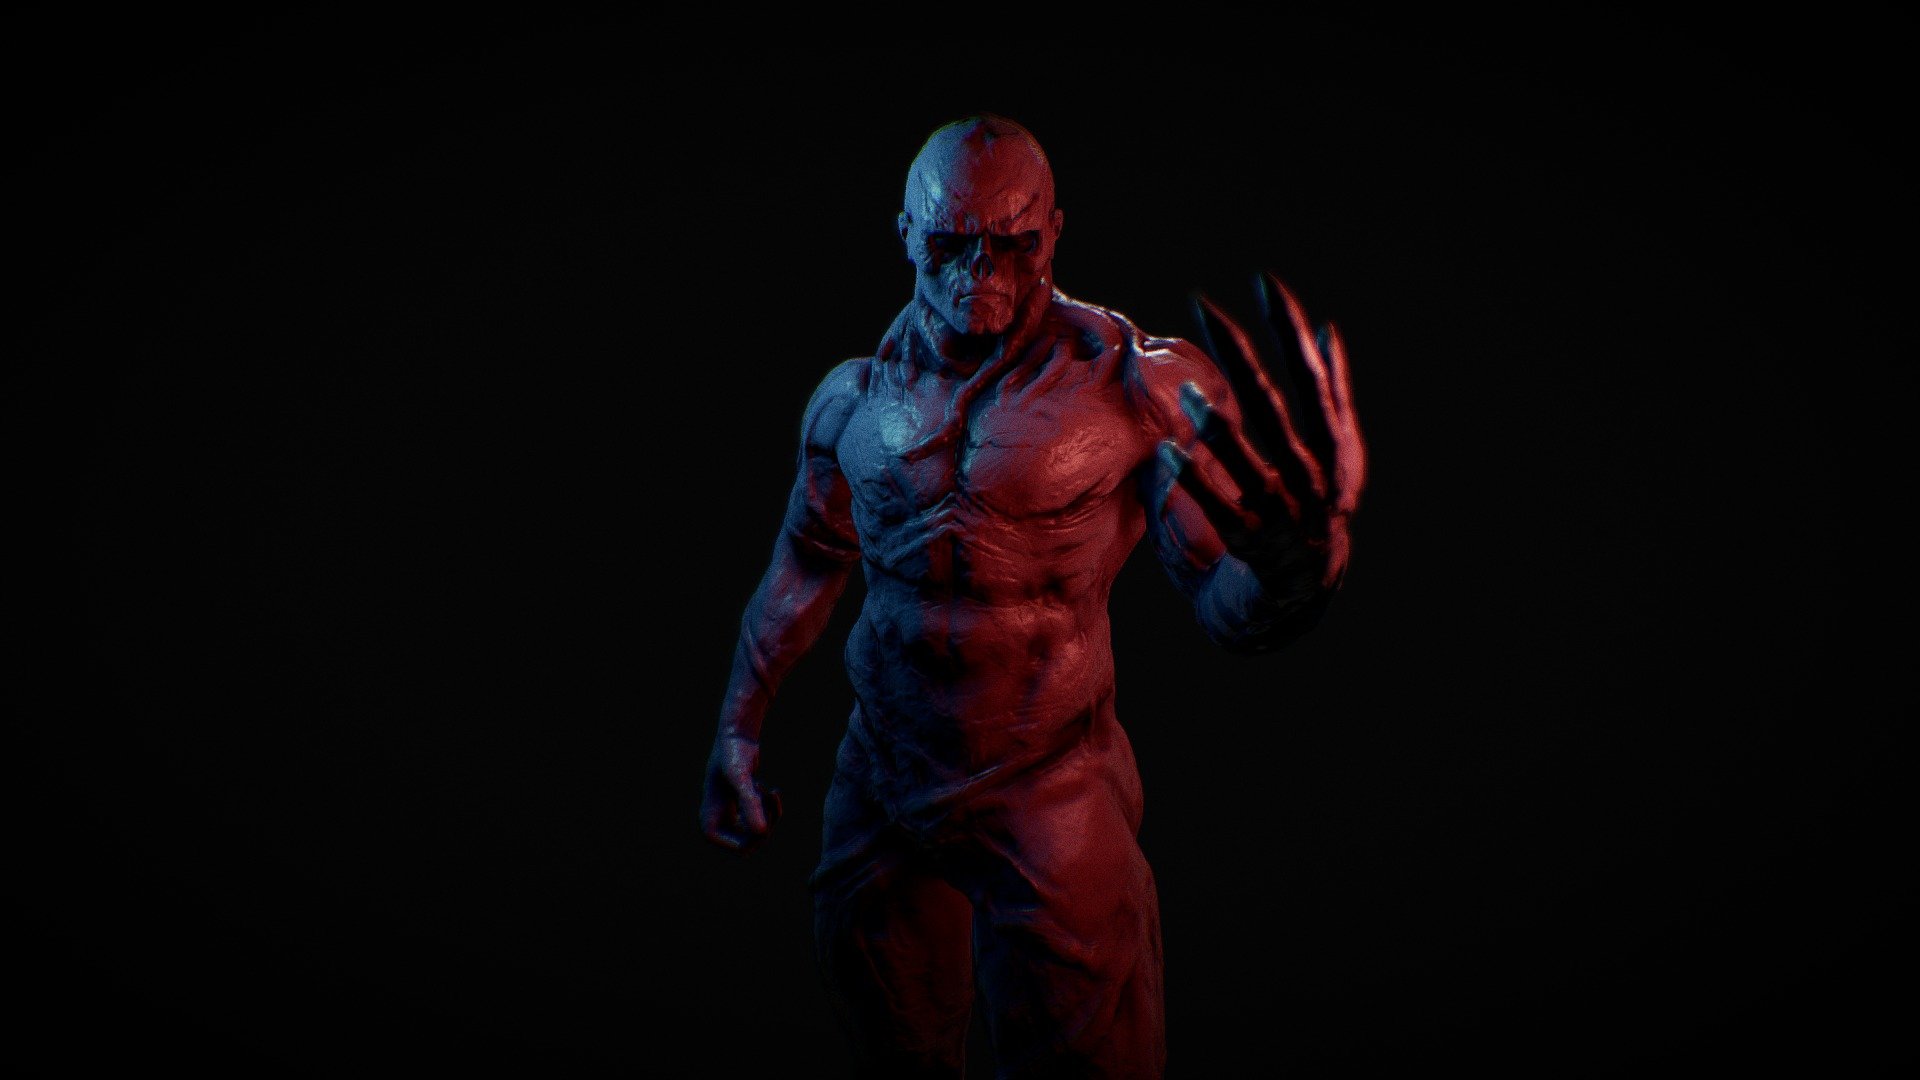 if you download this free model please take the time to leave a like.
Vecna from Stranger Things. one of my all time favourite shows, I realised there was a significant lack of Vecna art online so i used one of my basemeshes (just posted to my store) and created this piece!
ready to 3D print, highpoly model with no textures uvs, rigging etc as this was not intended to be game ready! - VECNA stranger things fan art - Download Free 3D model by Fred Drabble (@FredDrabble) 3d model